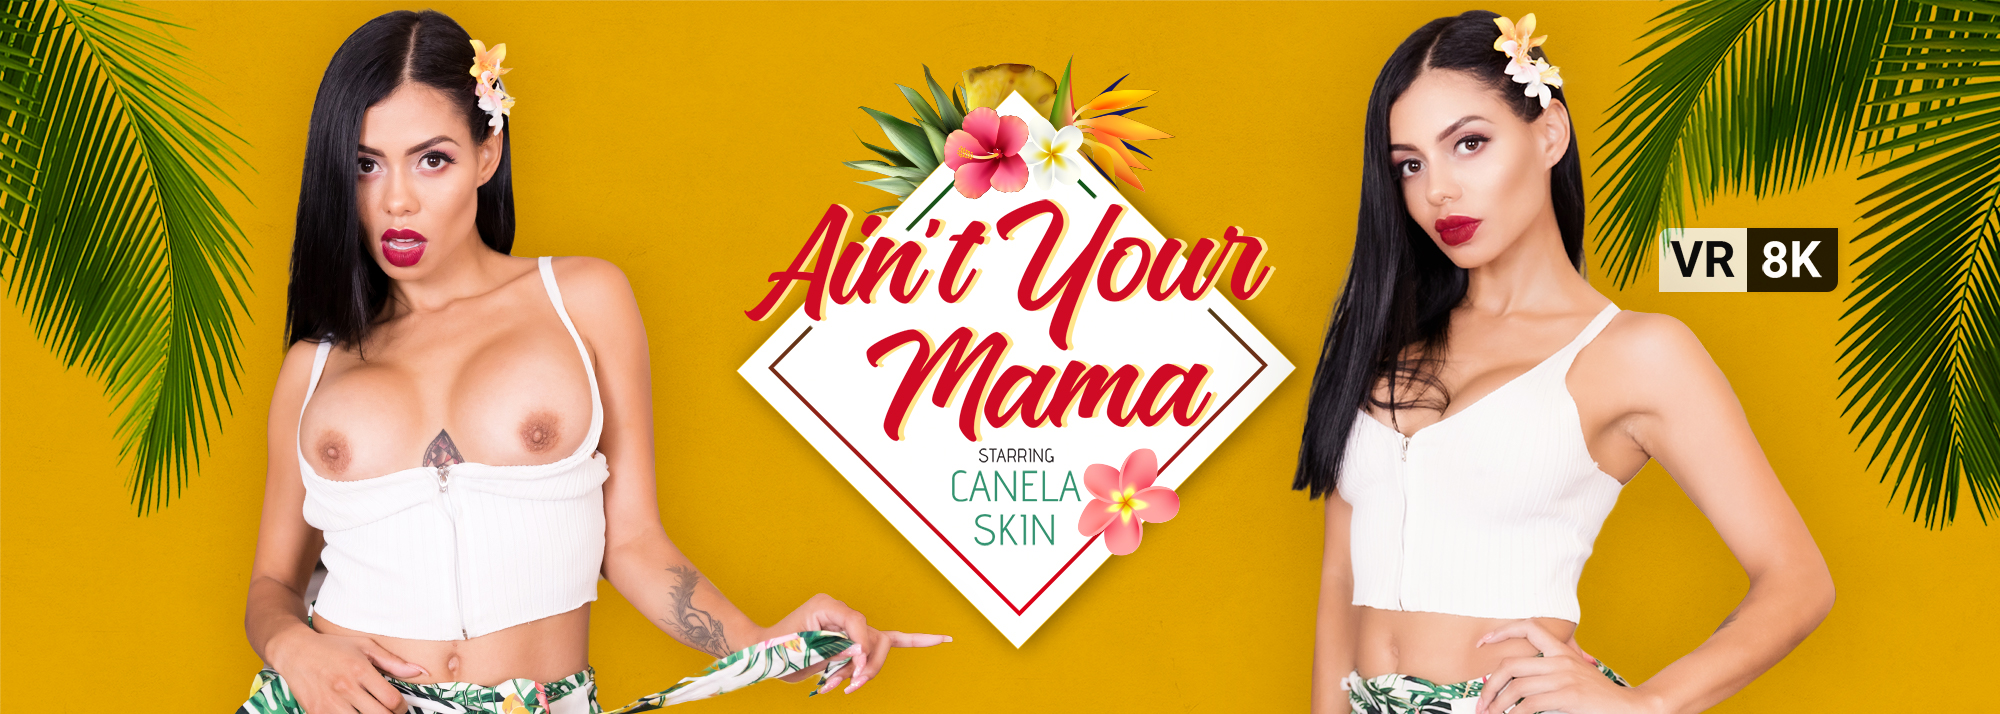 Ain't Your Mama - VR Porn Video, Starring: Canela Skin